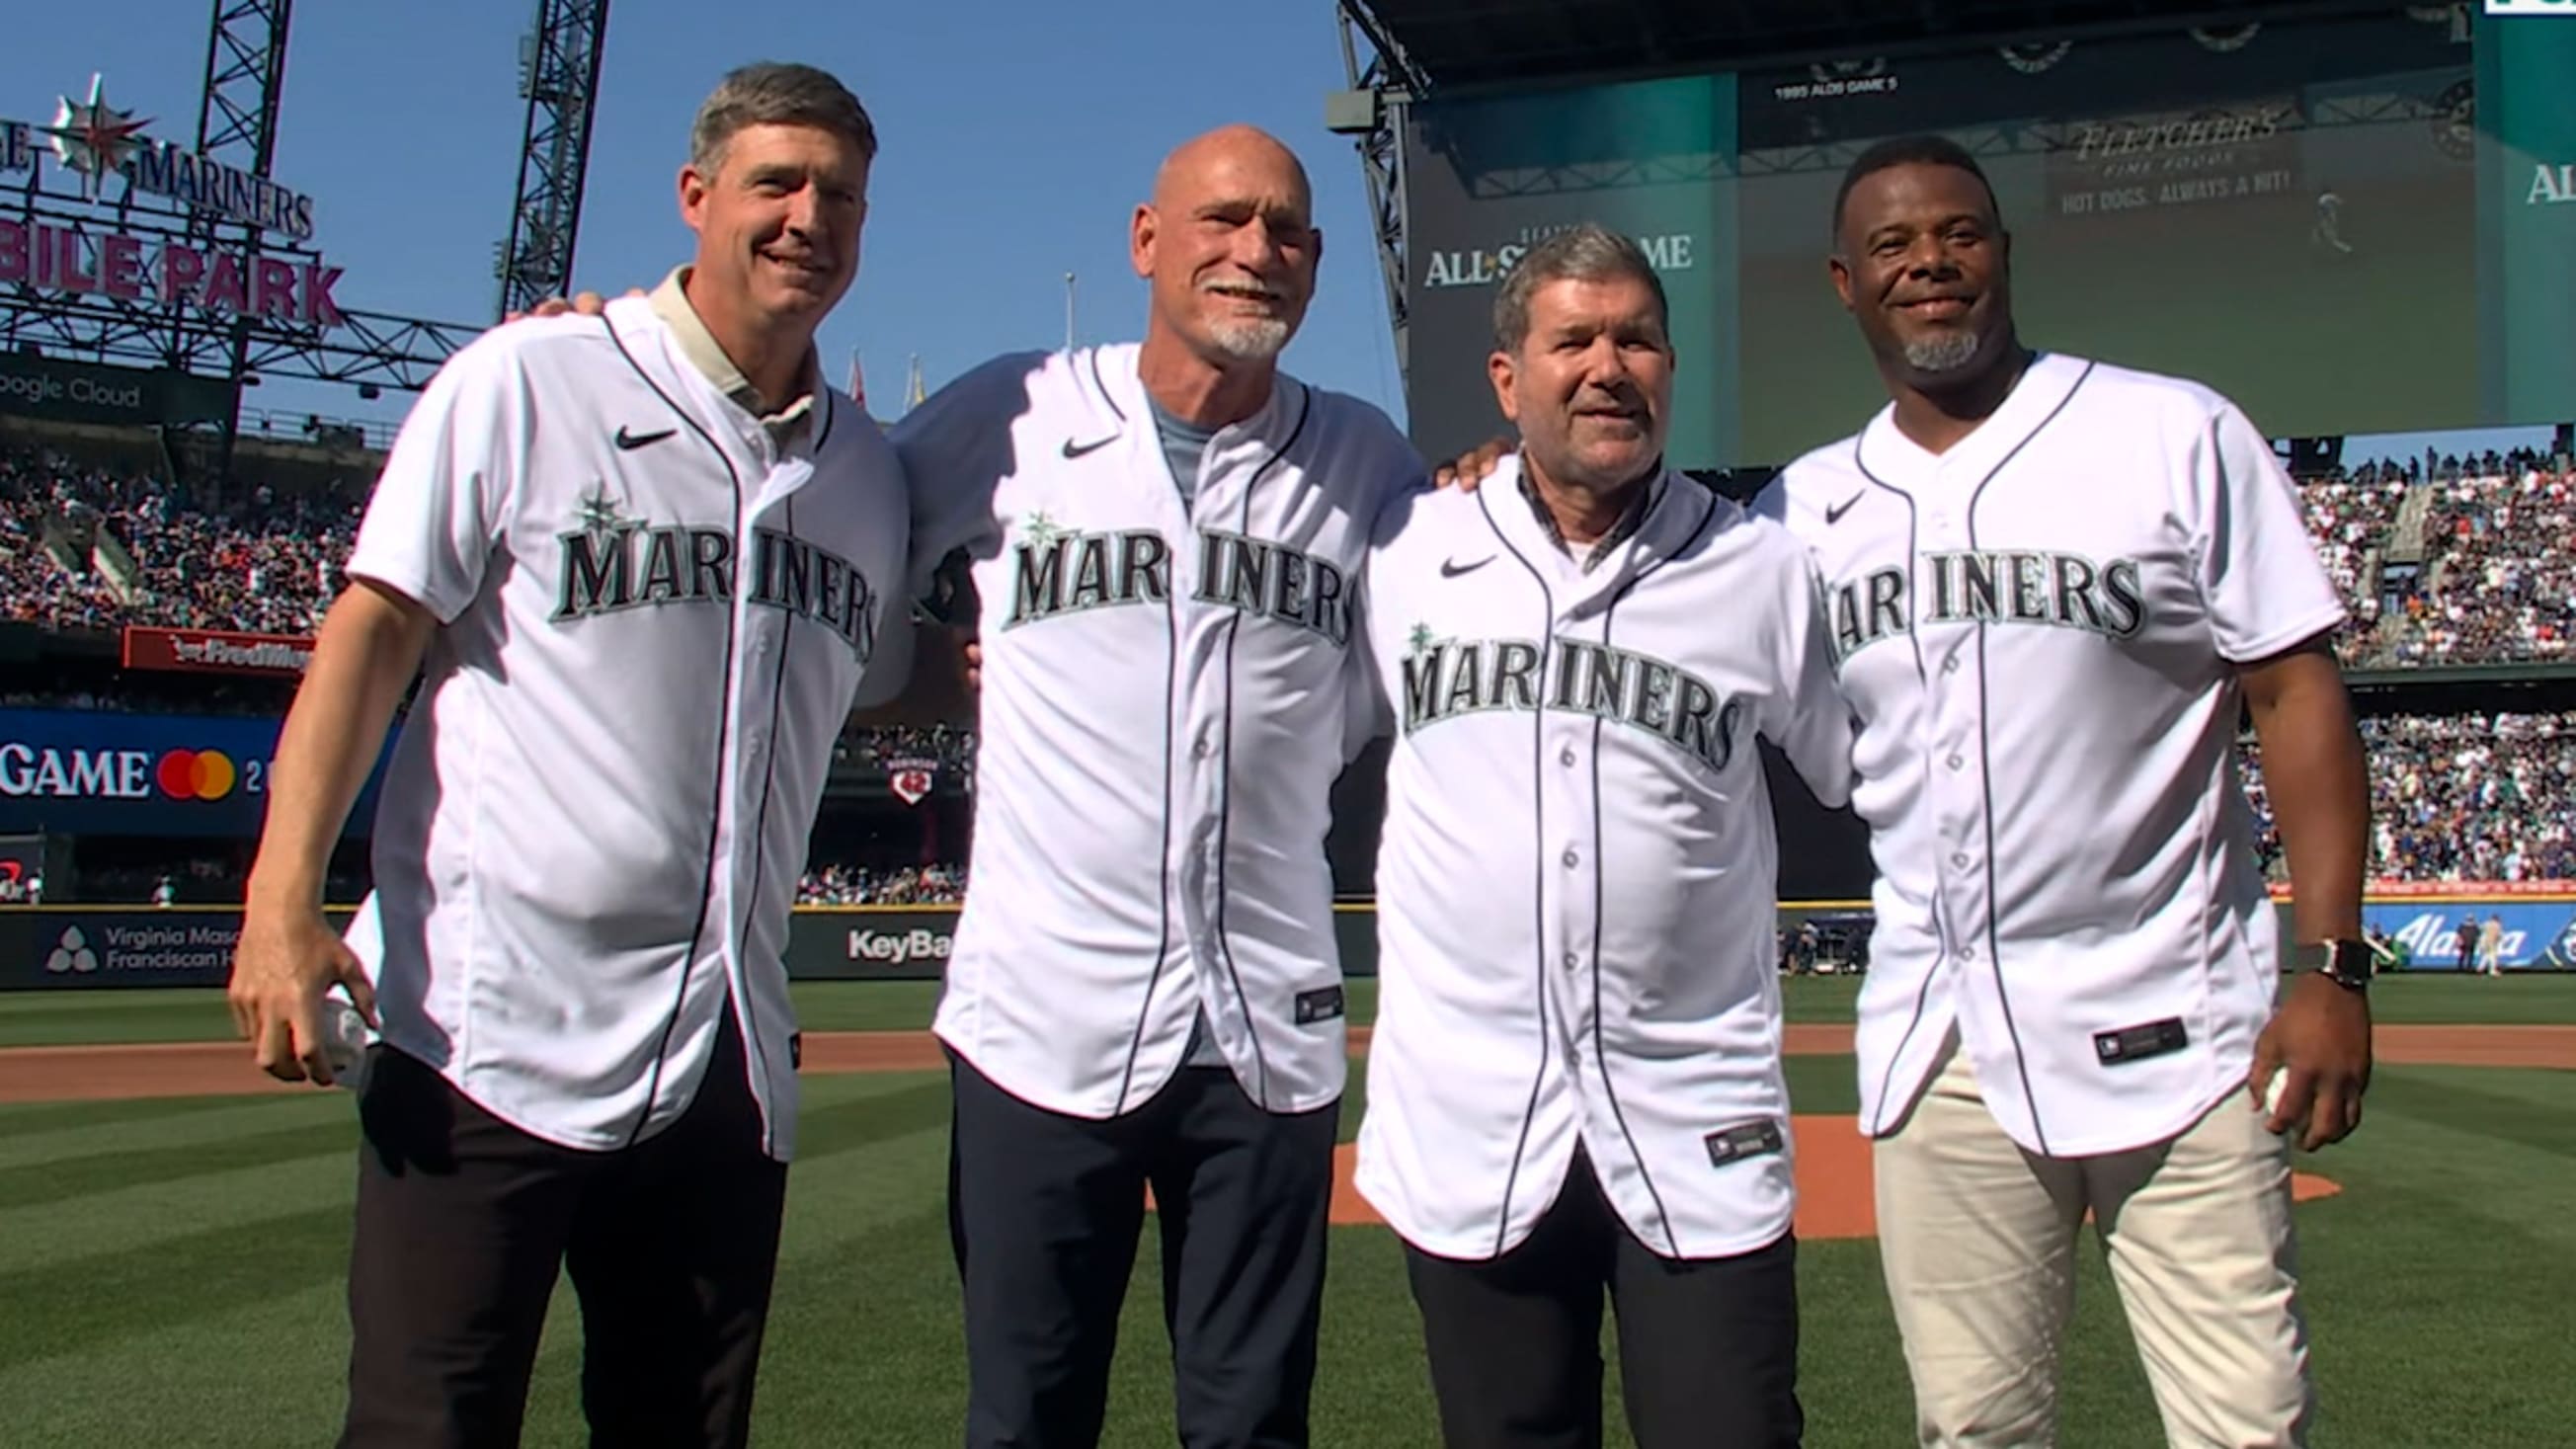 Mariners superfans throw out first pitch